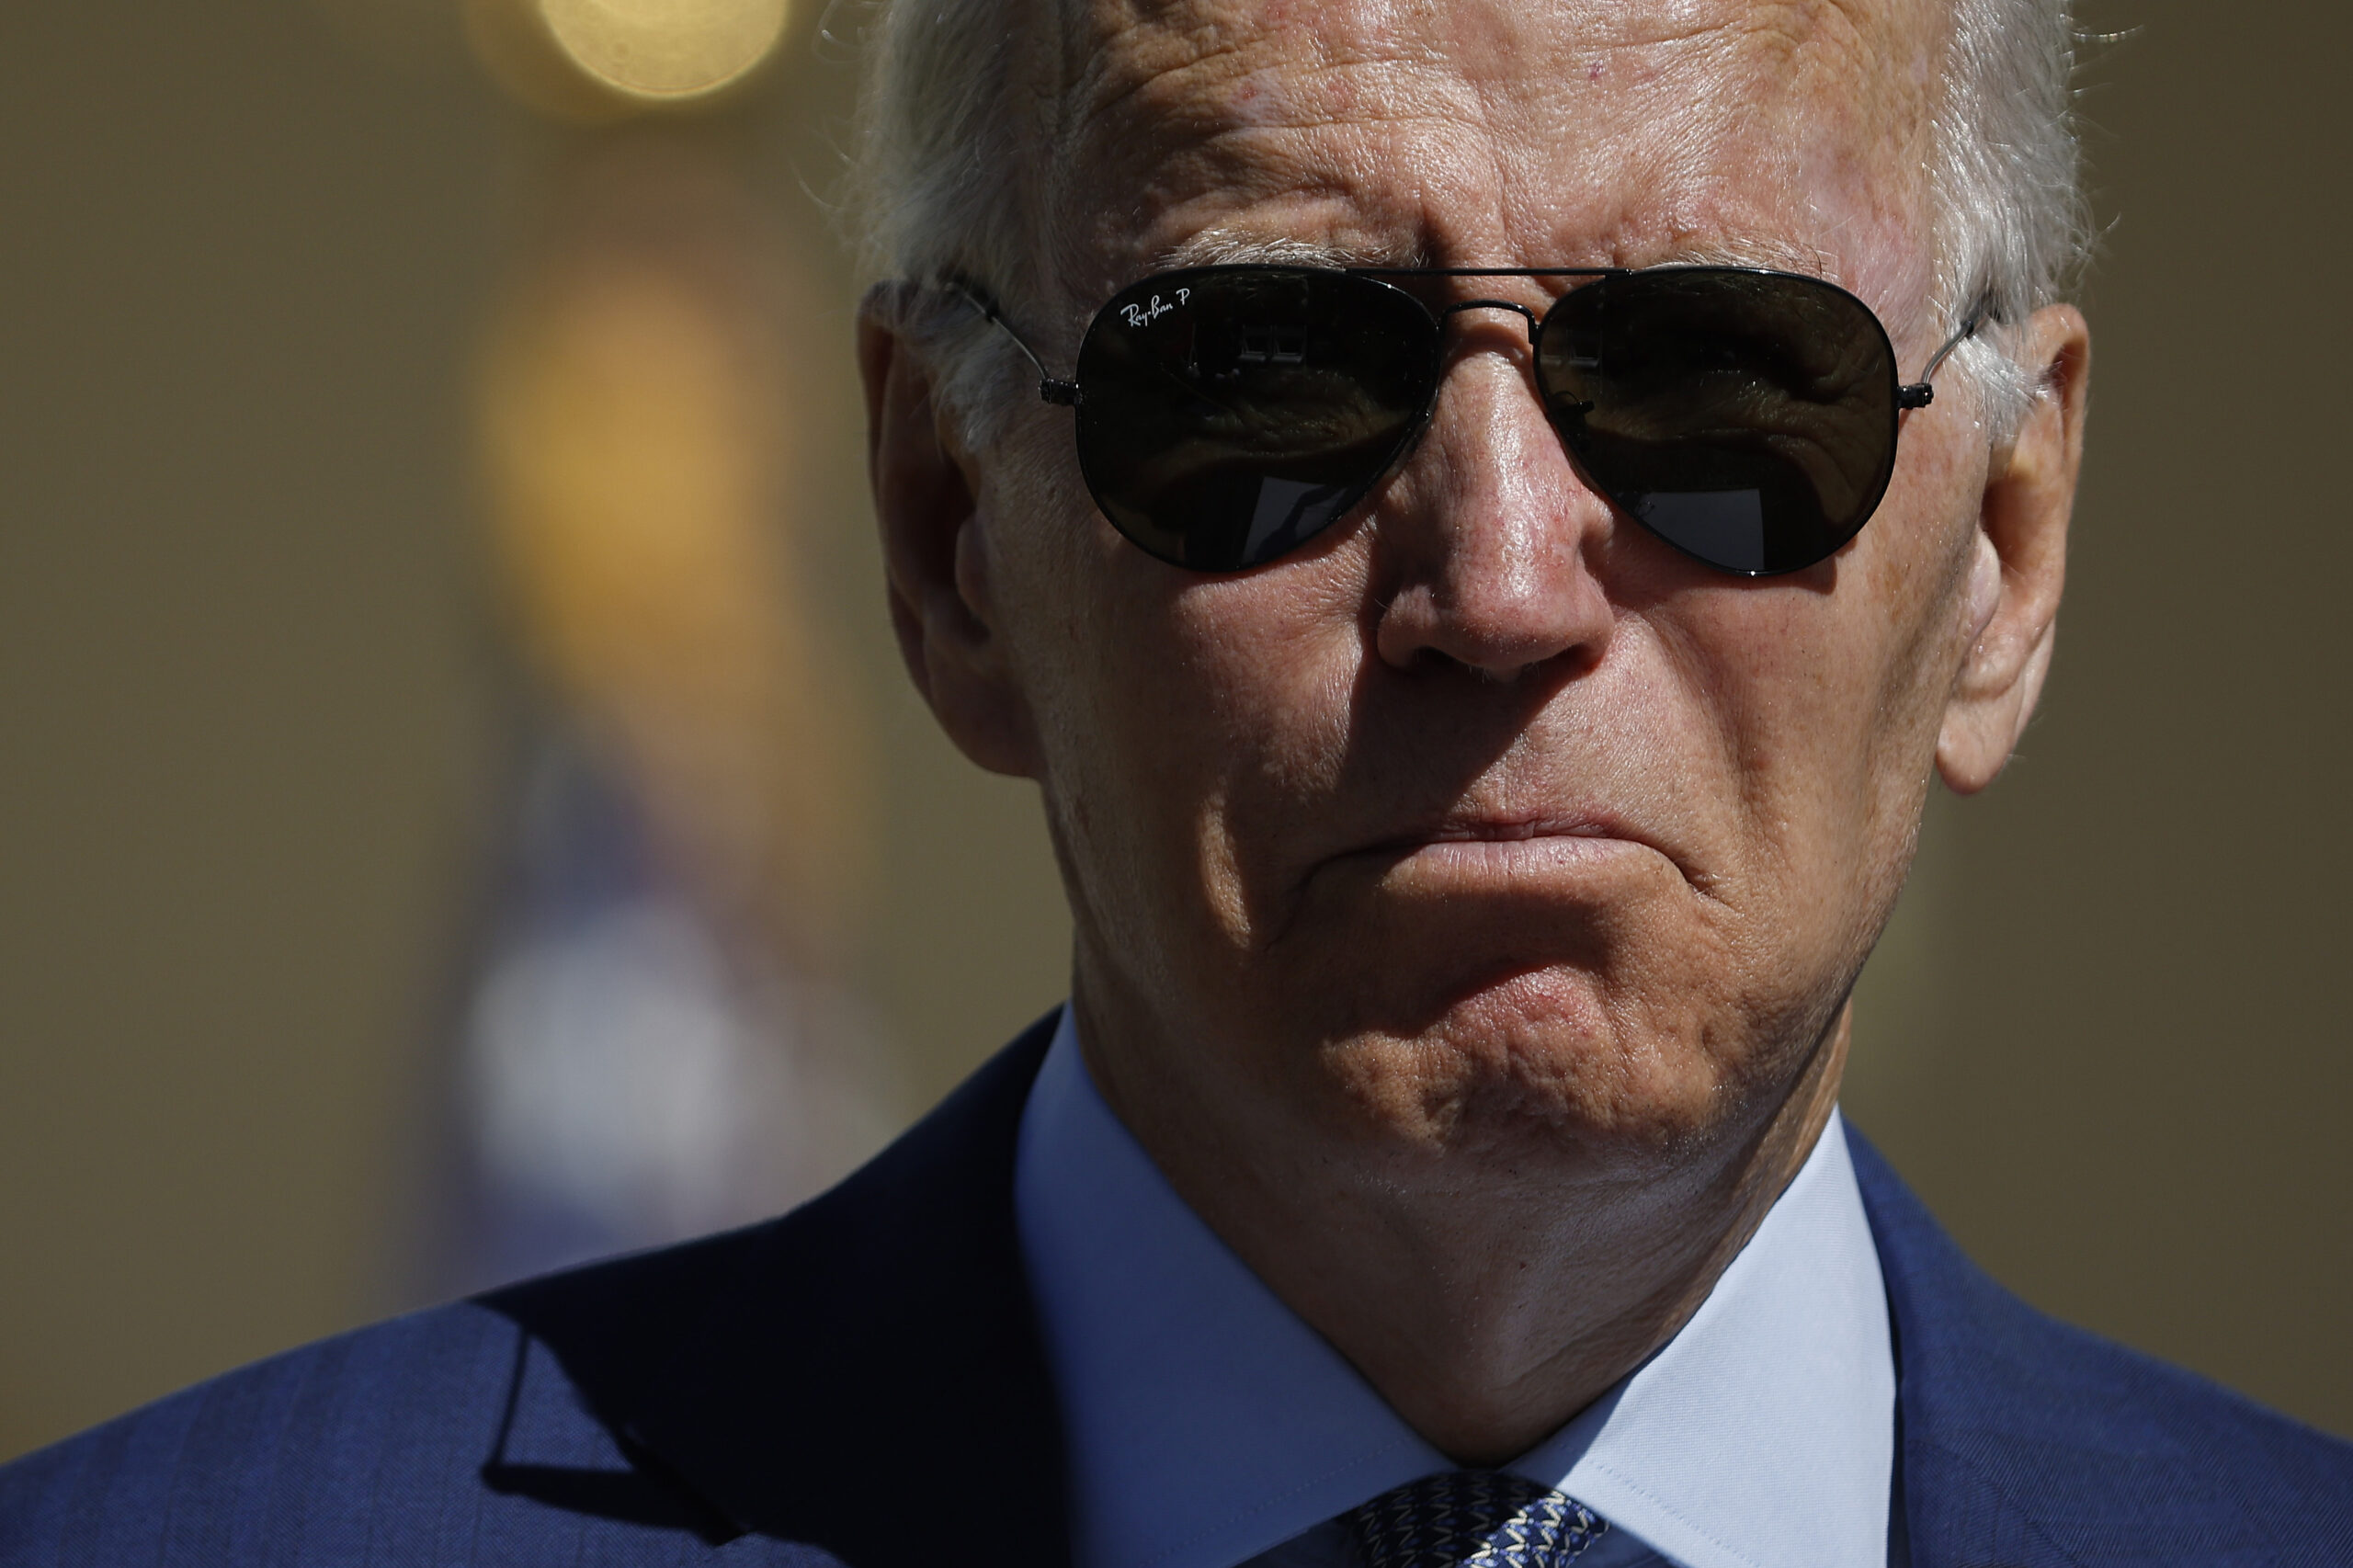 Biden Approval Rating Still at 40 Percent With Midterms Three Weeks Away: Reuters/Ipsos Poll